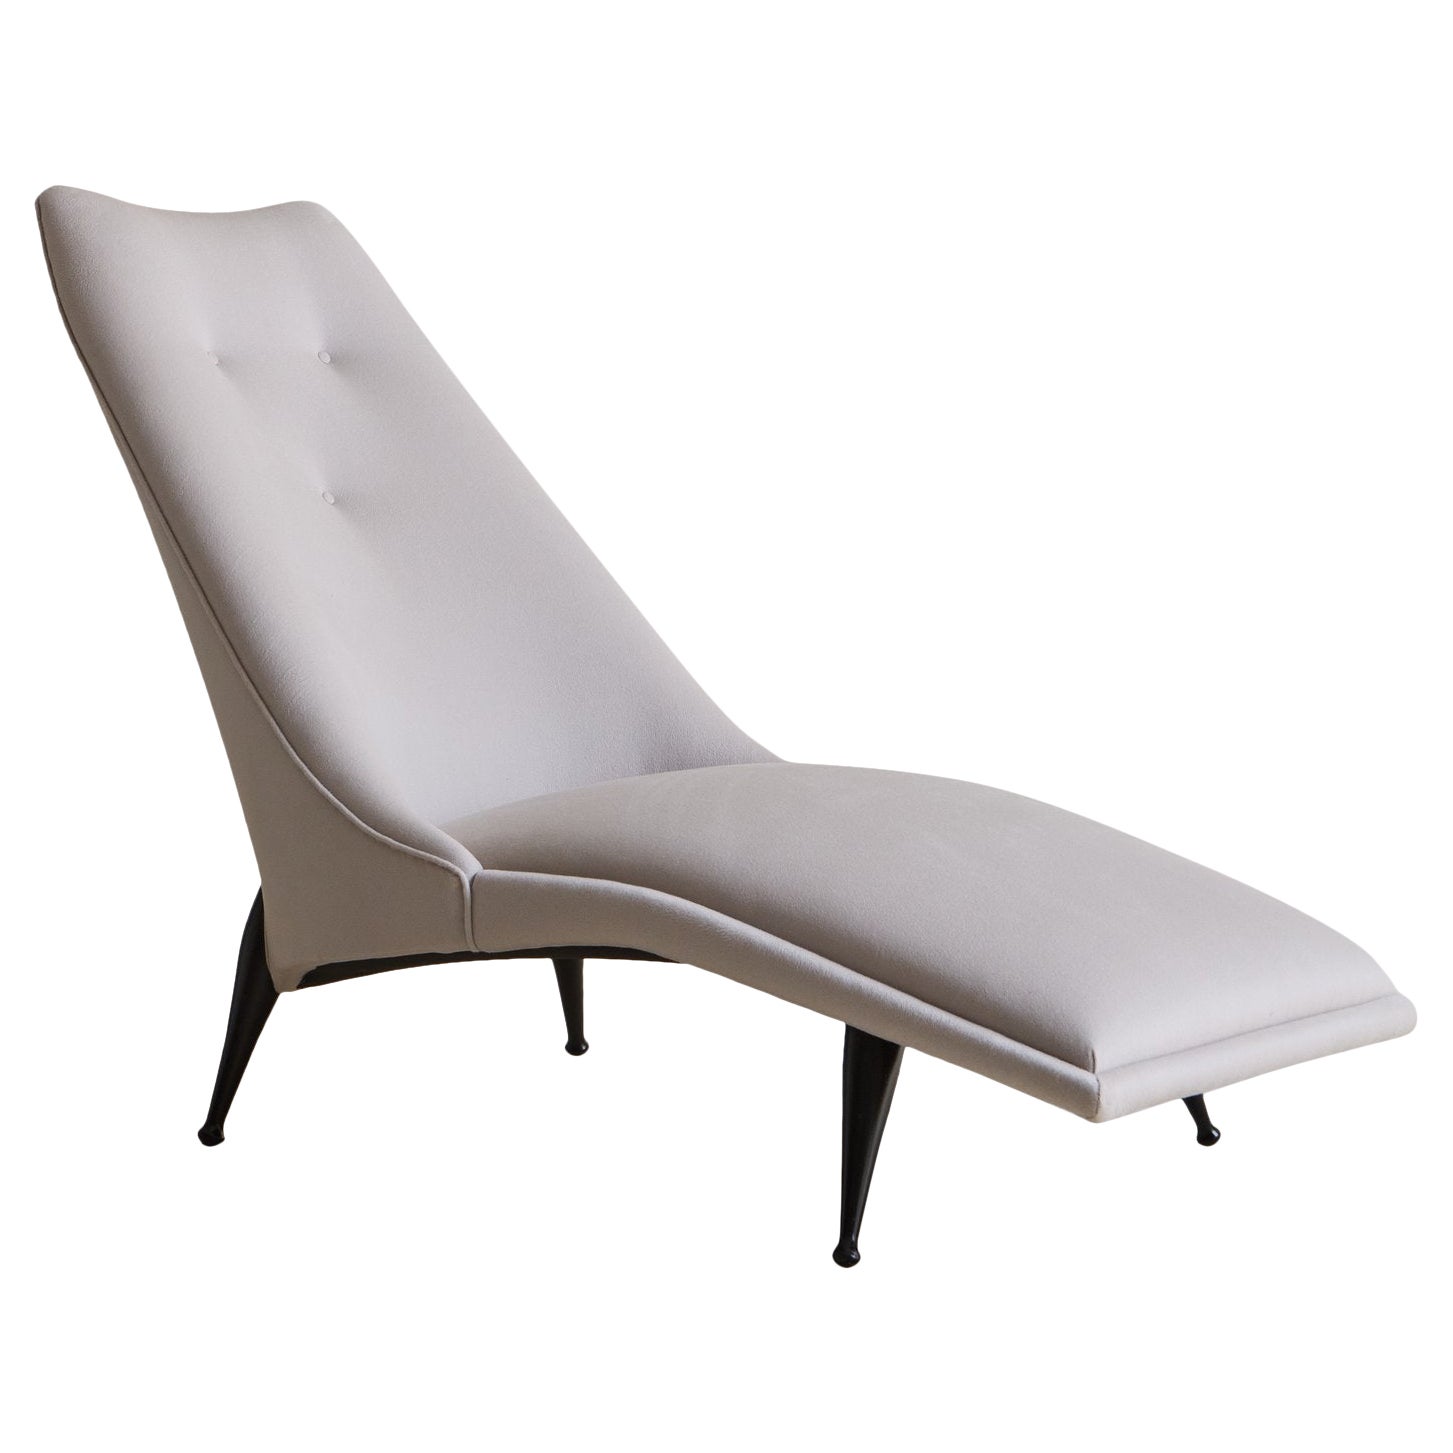 ‘Beautiful Dreamer’ Chaise Lounge by Ben Seibel, USA 1950s For Sale